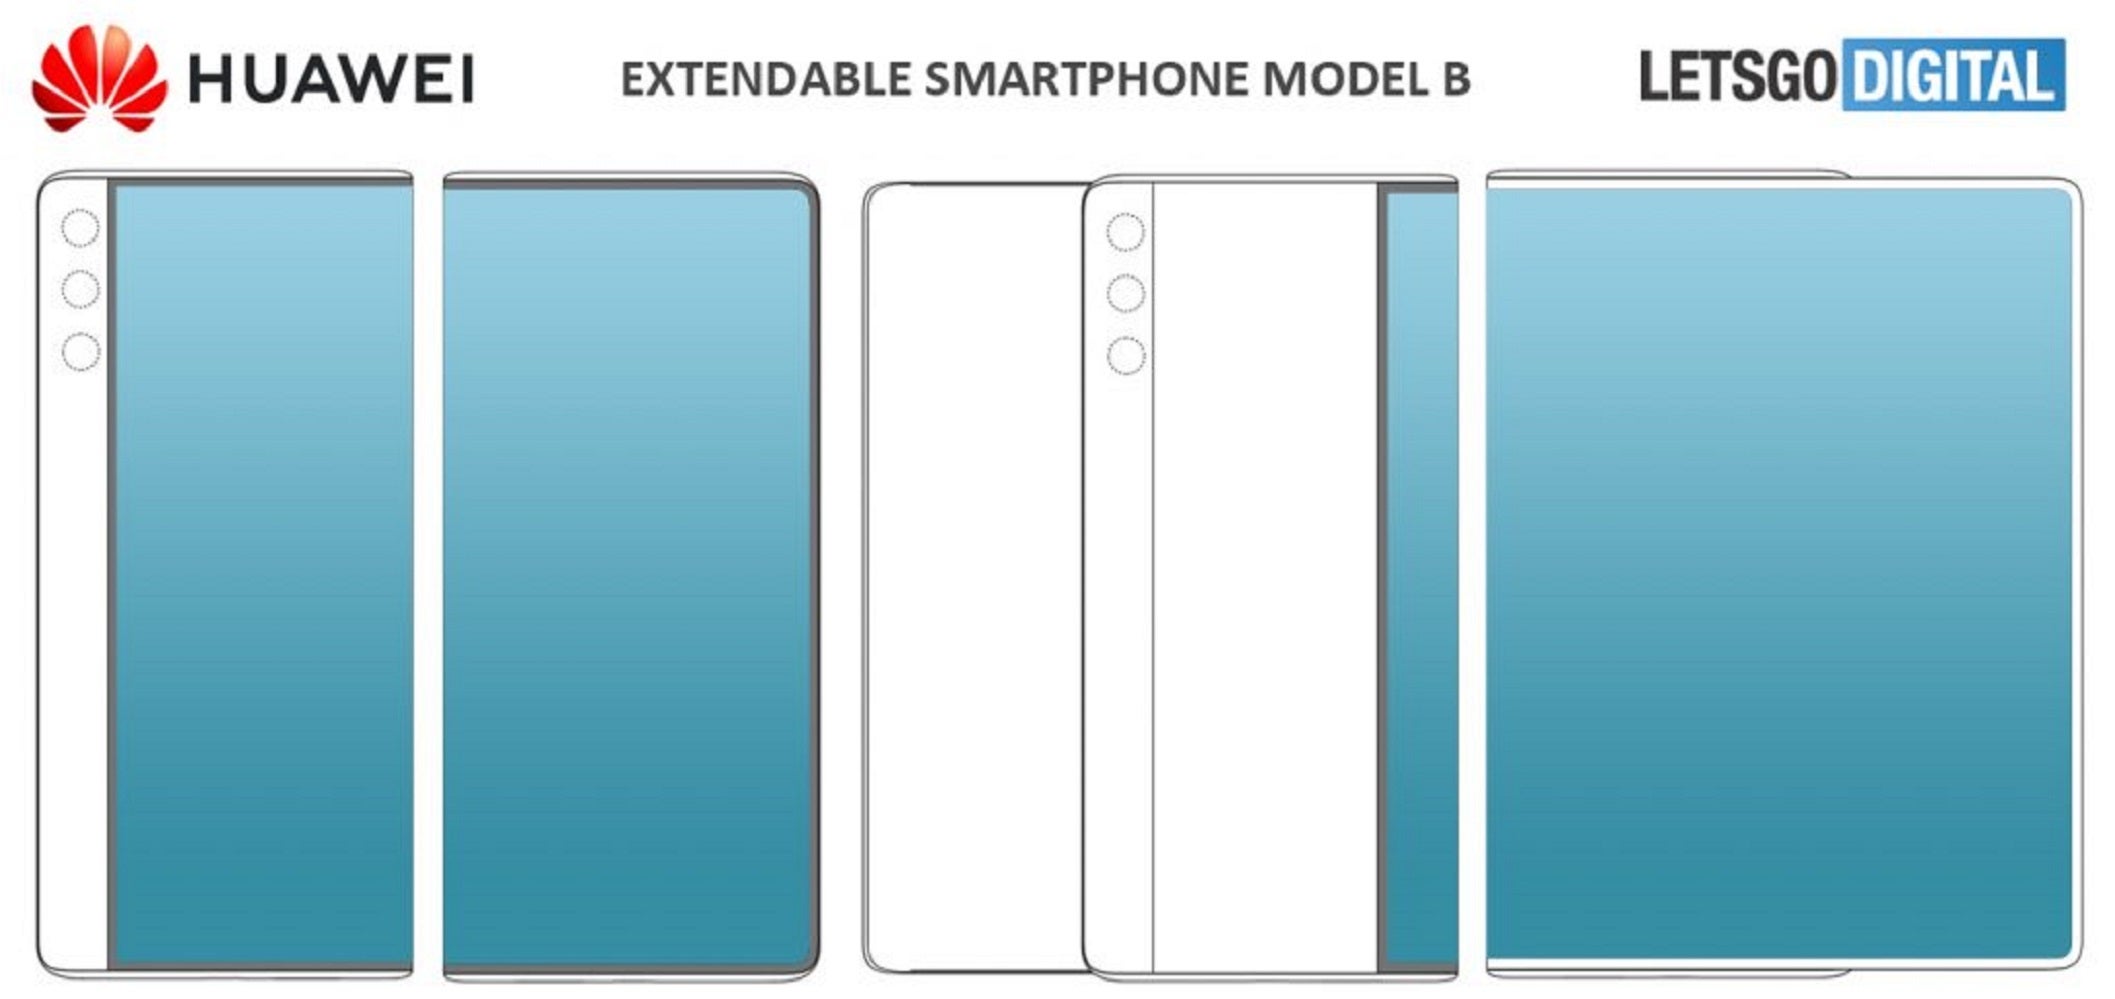 New Huawei patent shows two smartphones with sliding displays